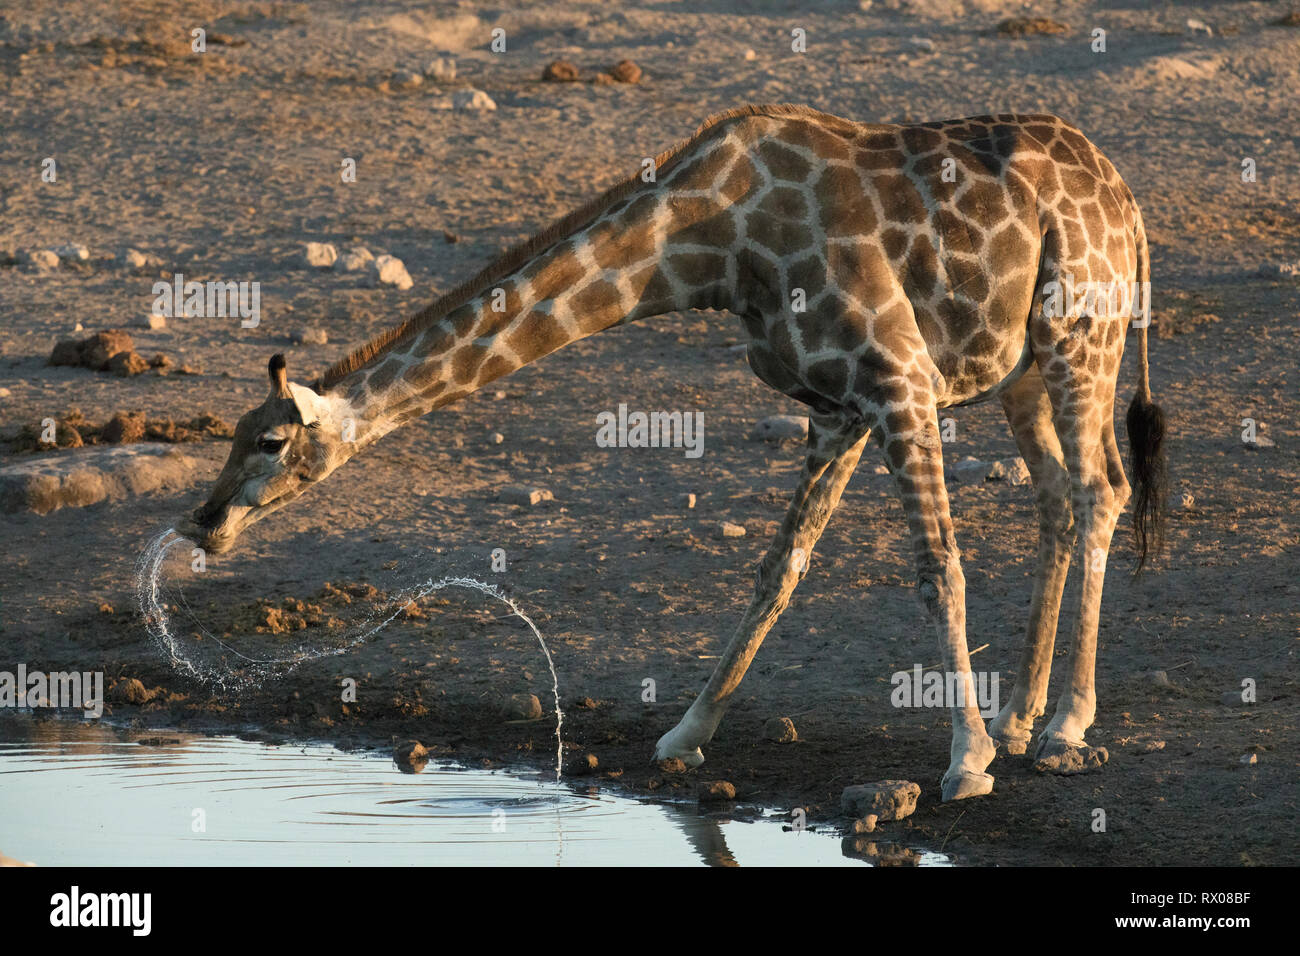 A Giraffe drinking at a water hole in Etosha national Park, Namibia. Stock Photo